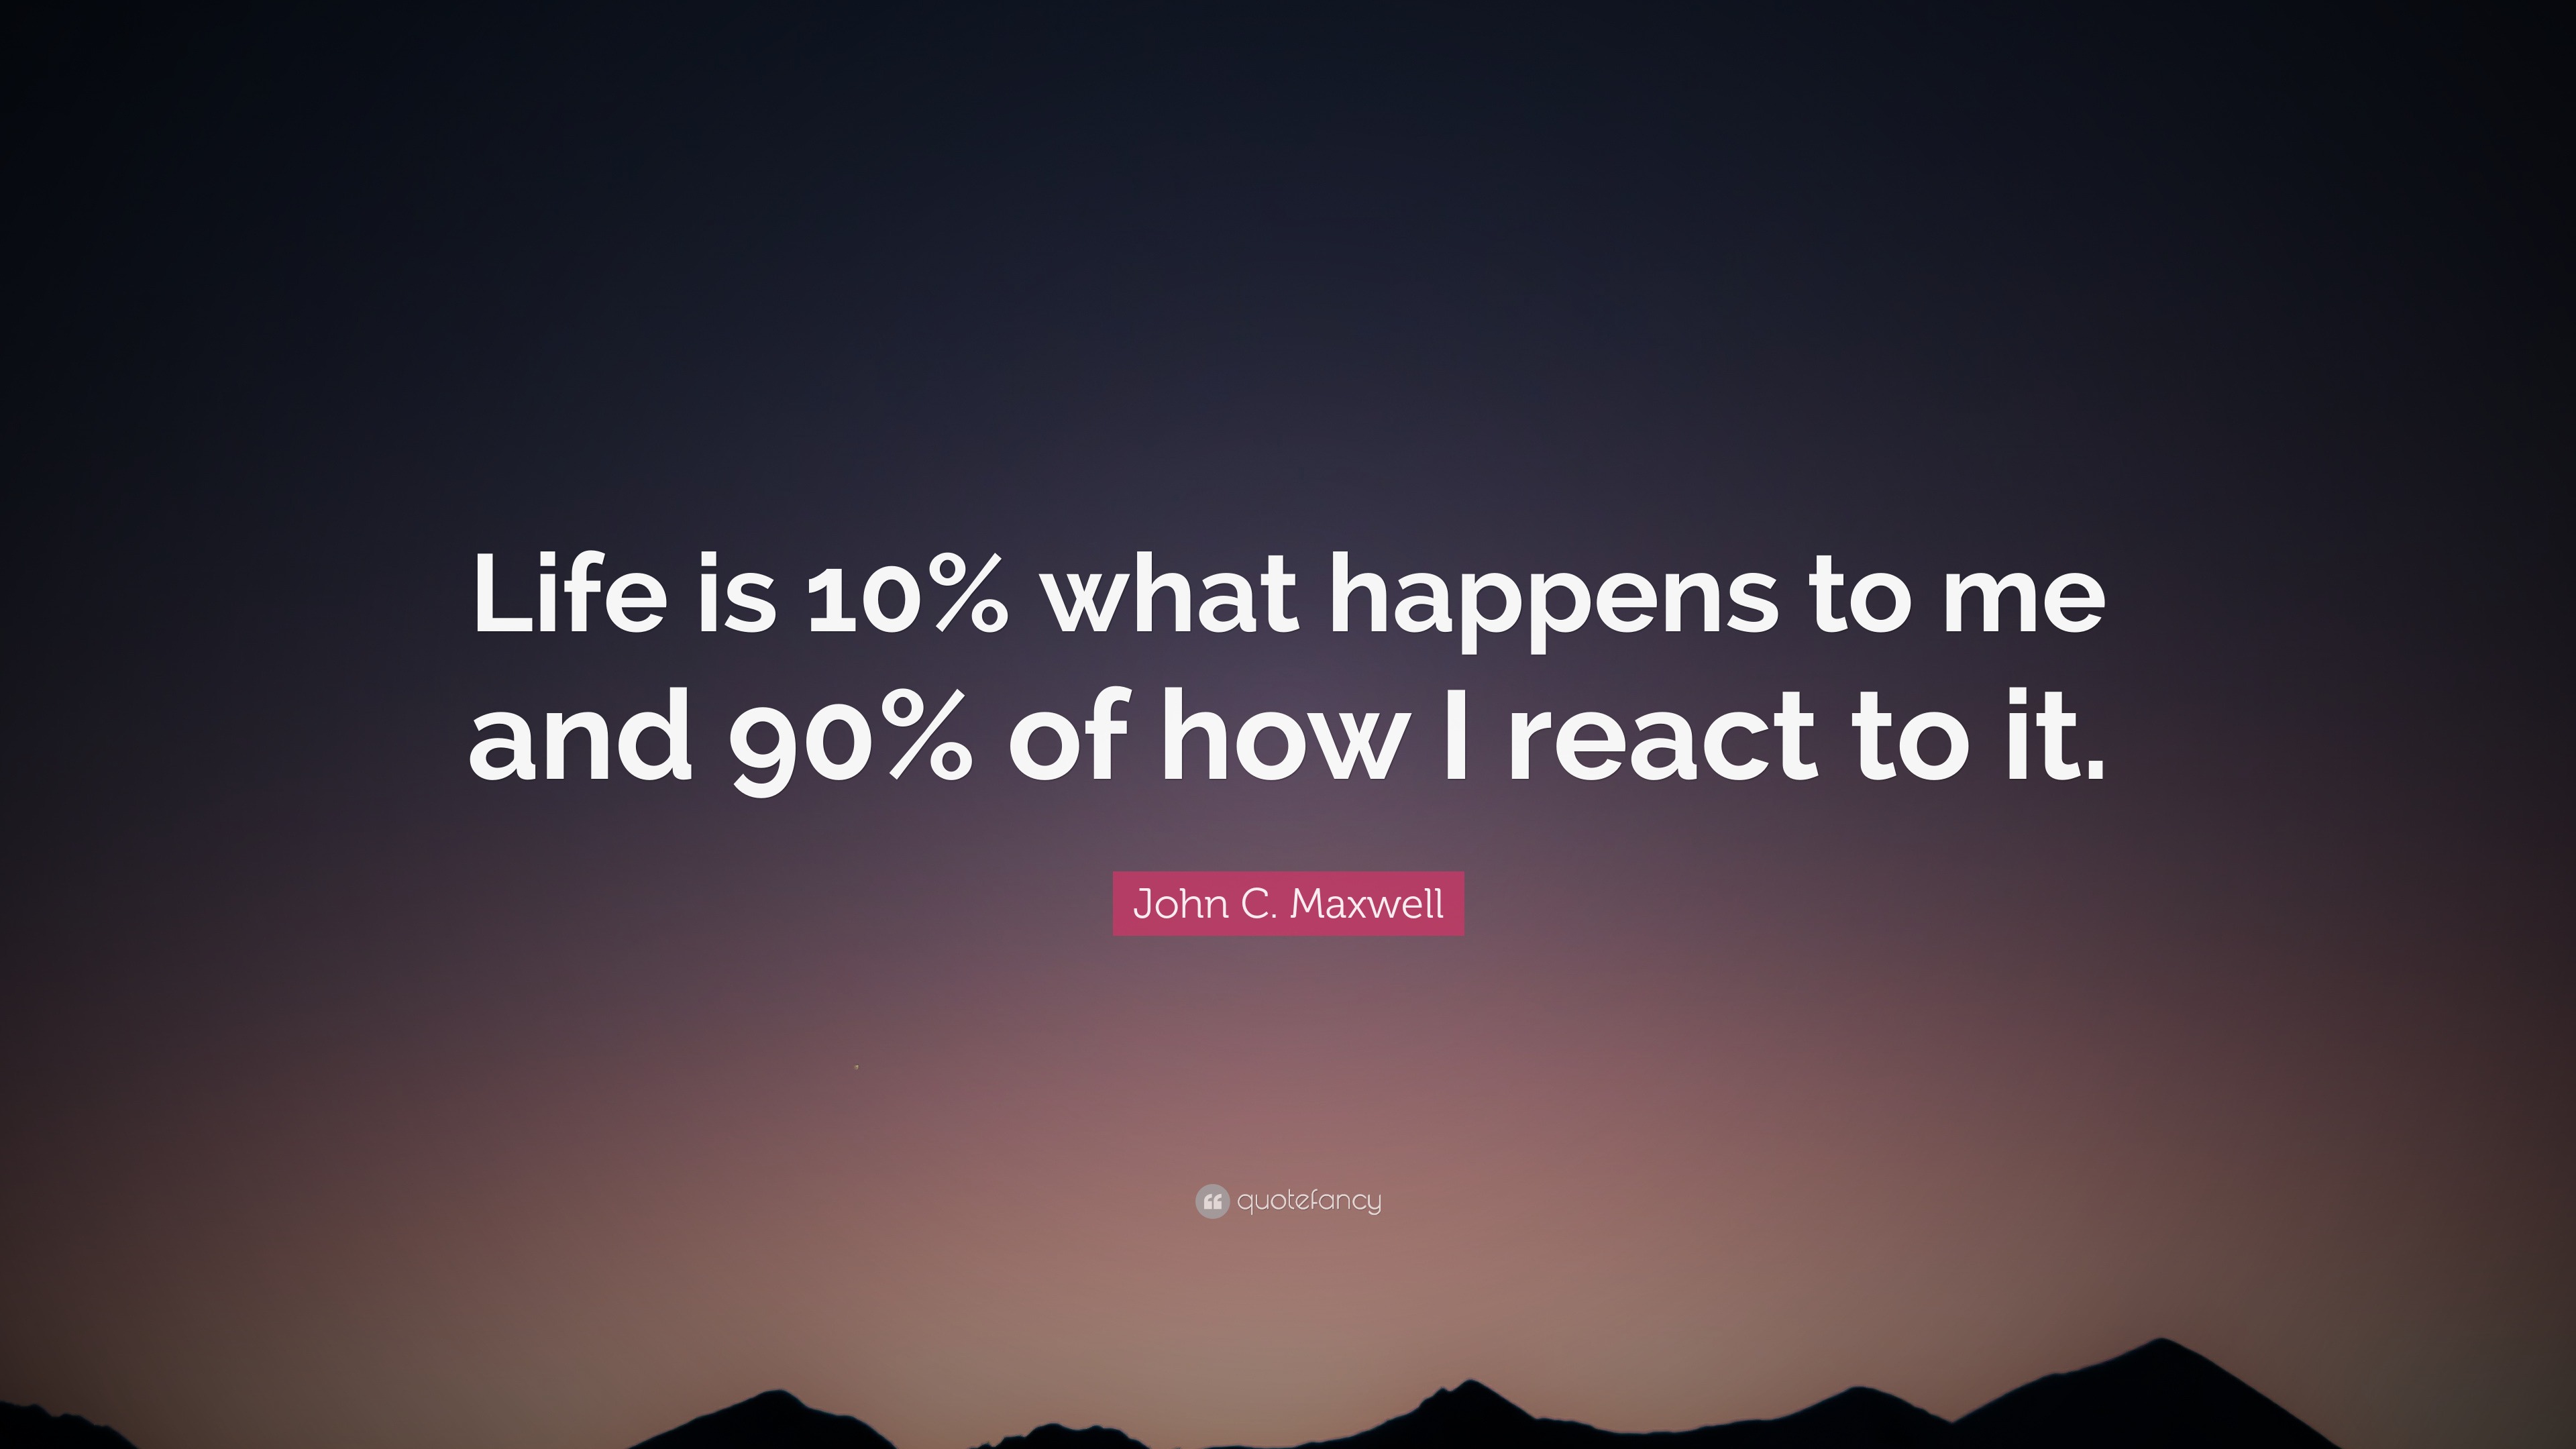 10 percent of the world is what actually happens 90 percent is how we react to iy. quote